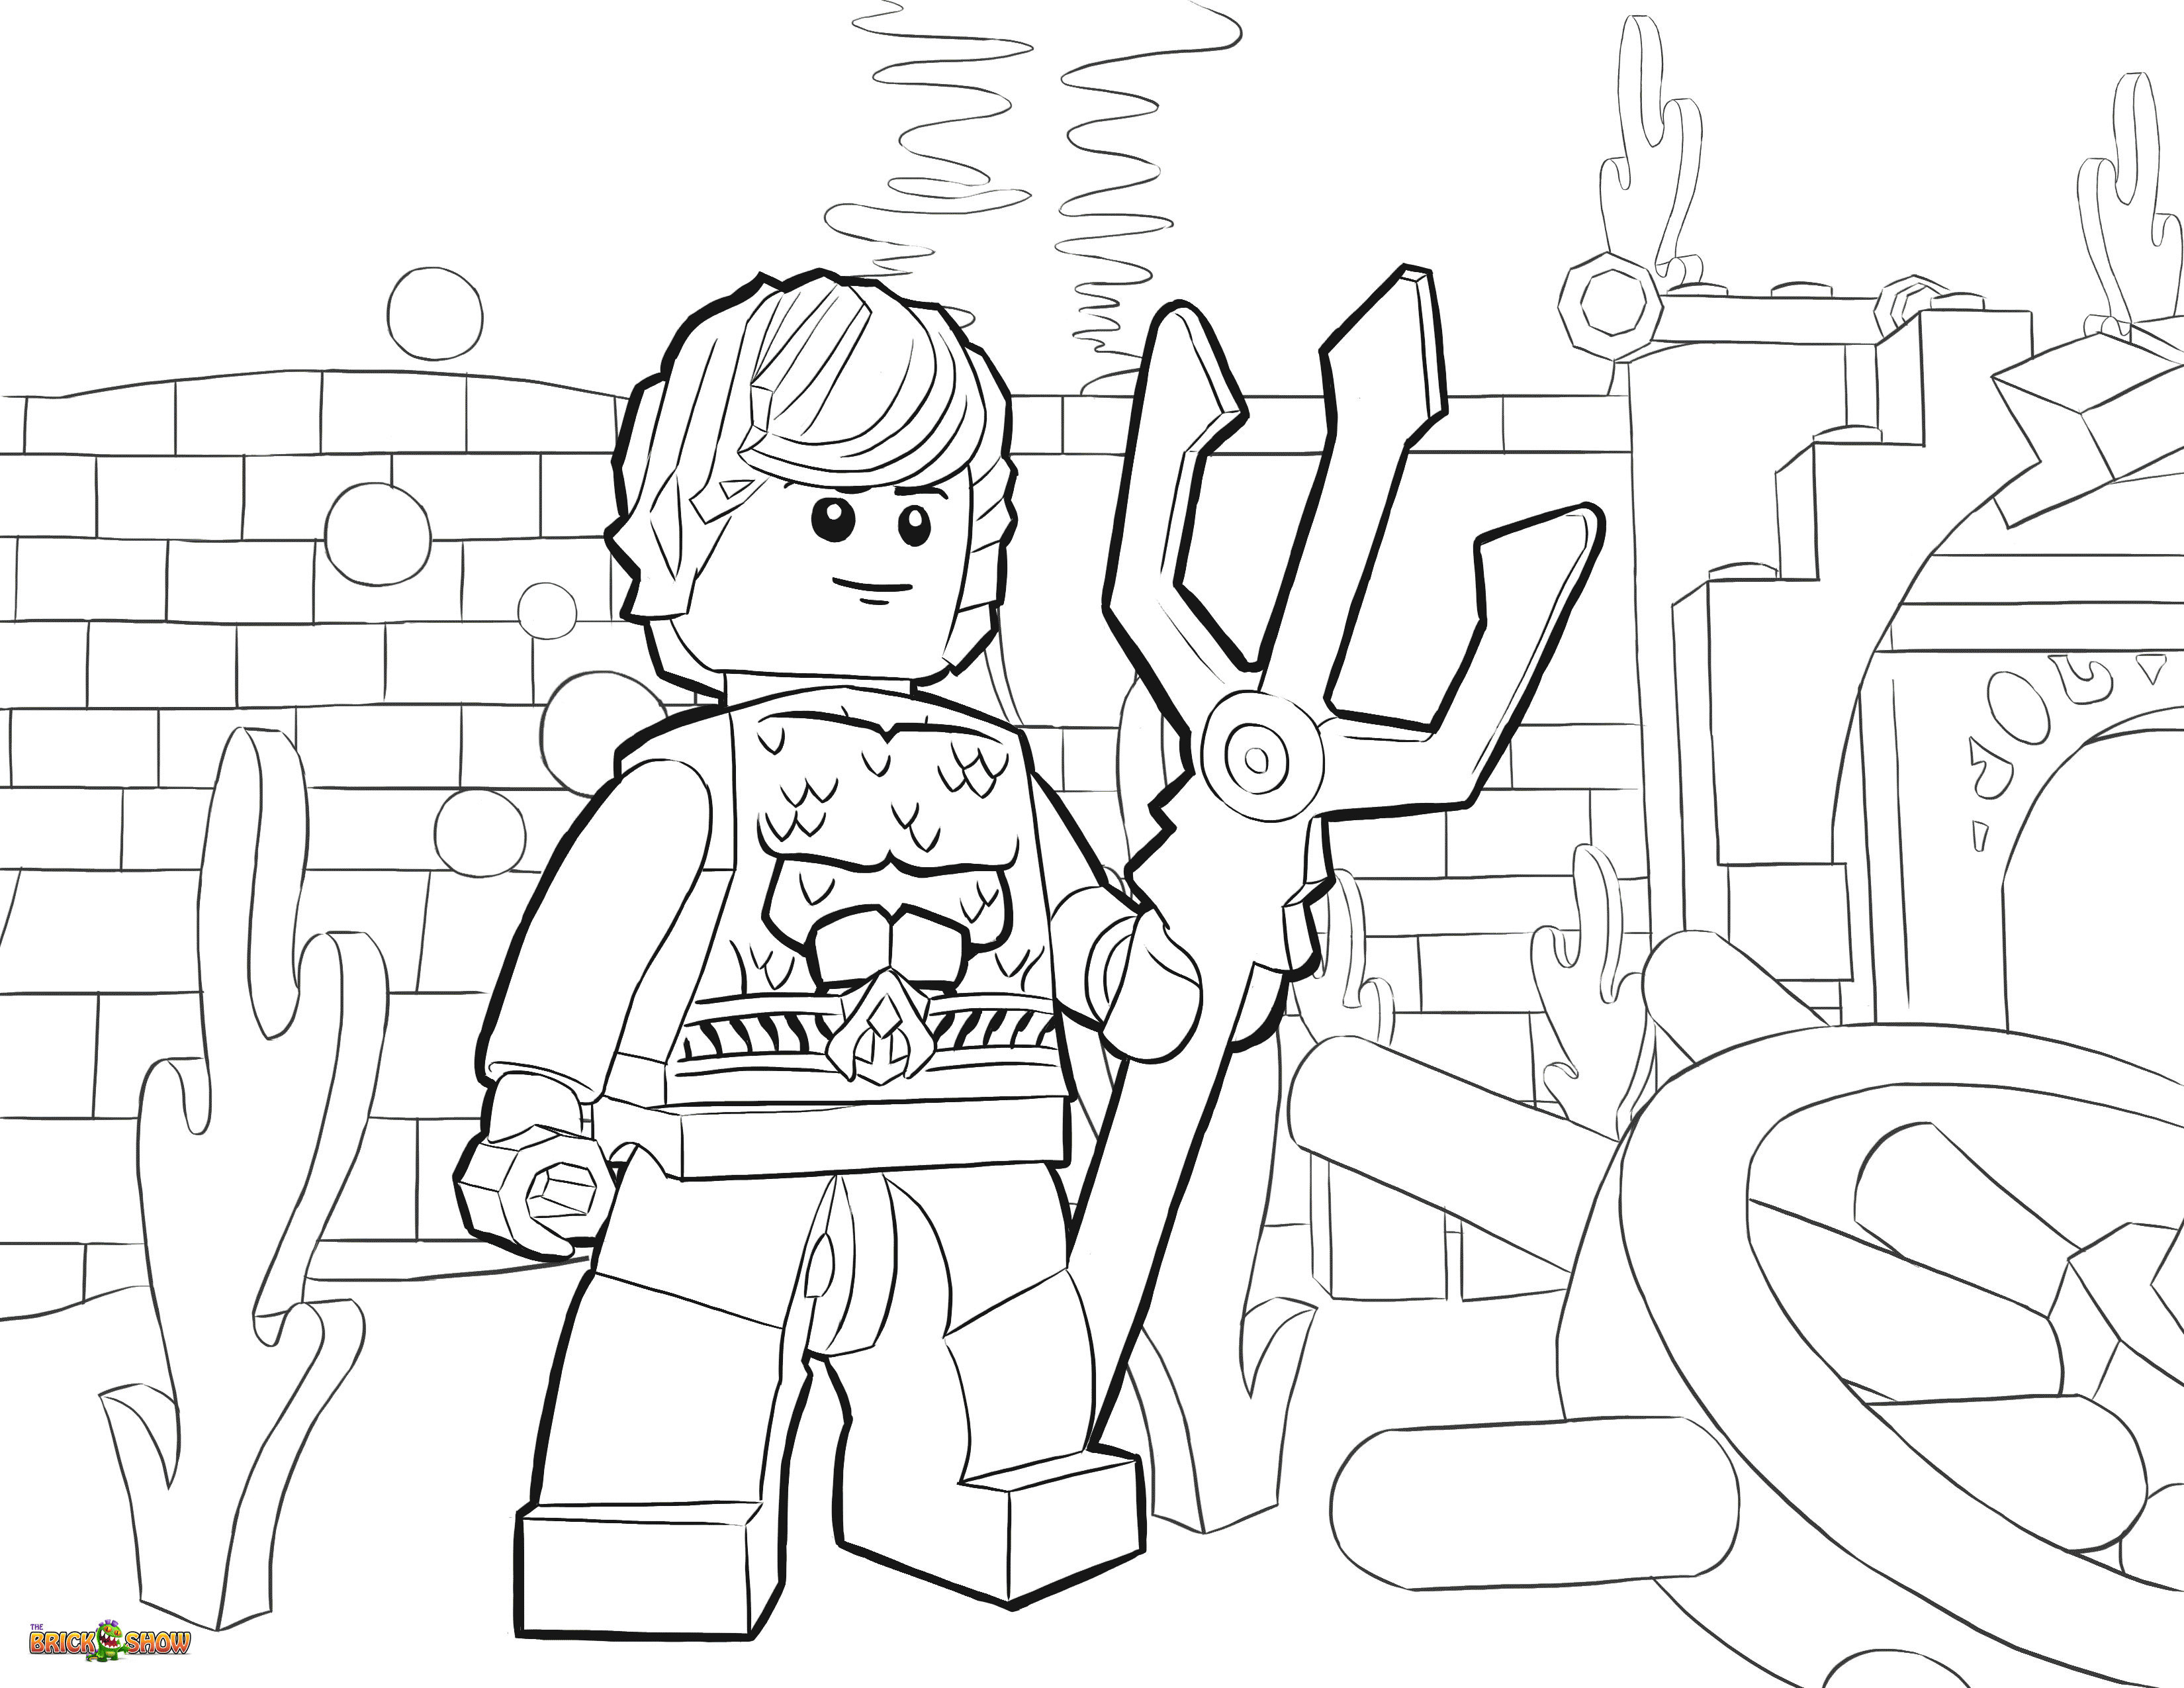 Lego Avengers Coloring Pages
 Avengers Lego Coloring Pages Coloring Home